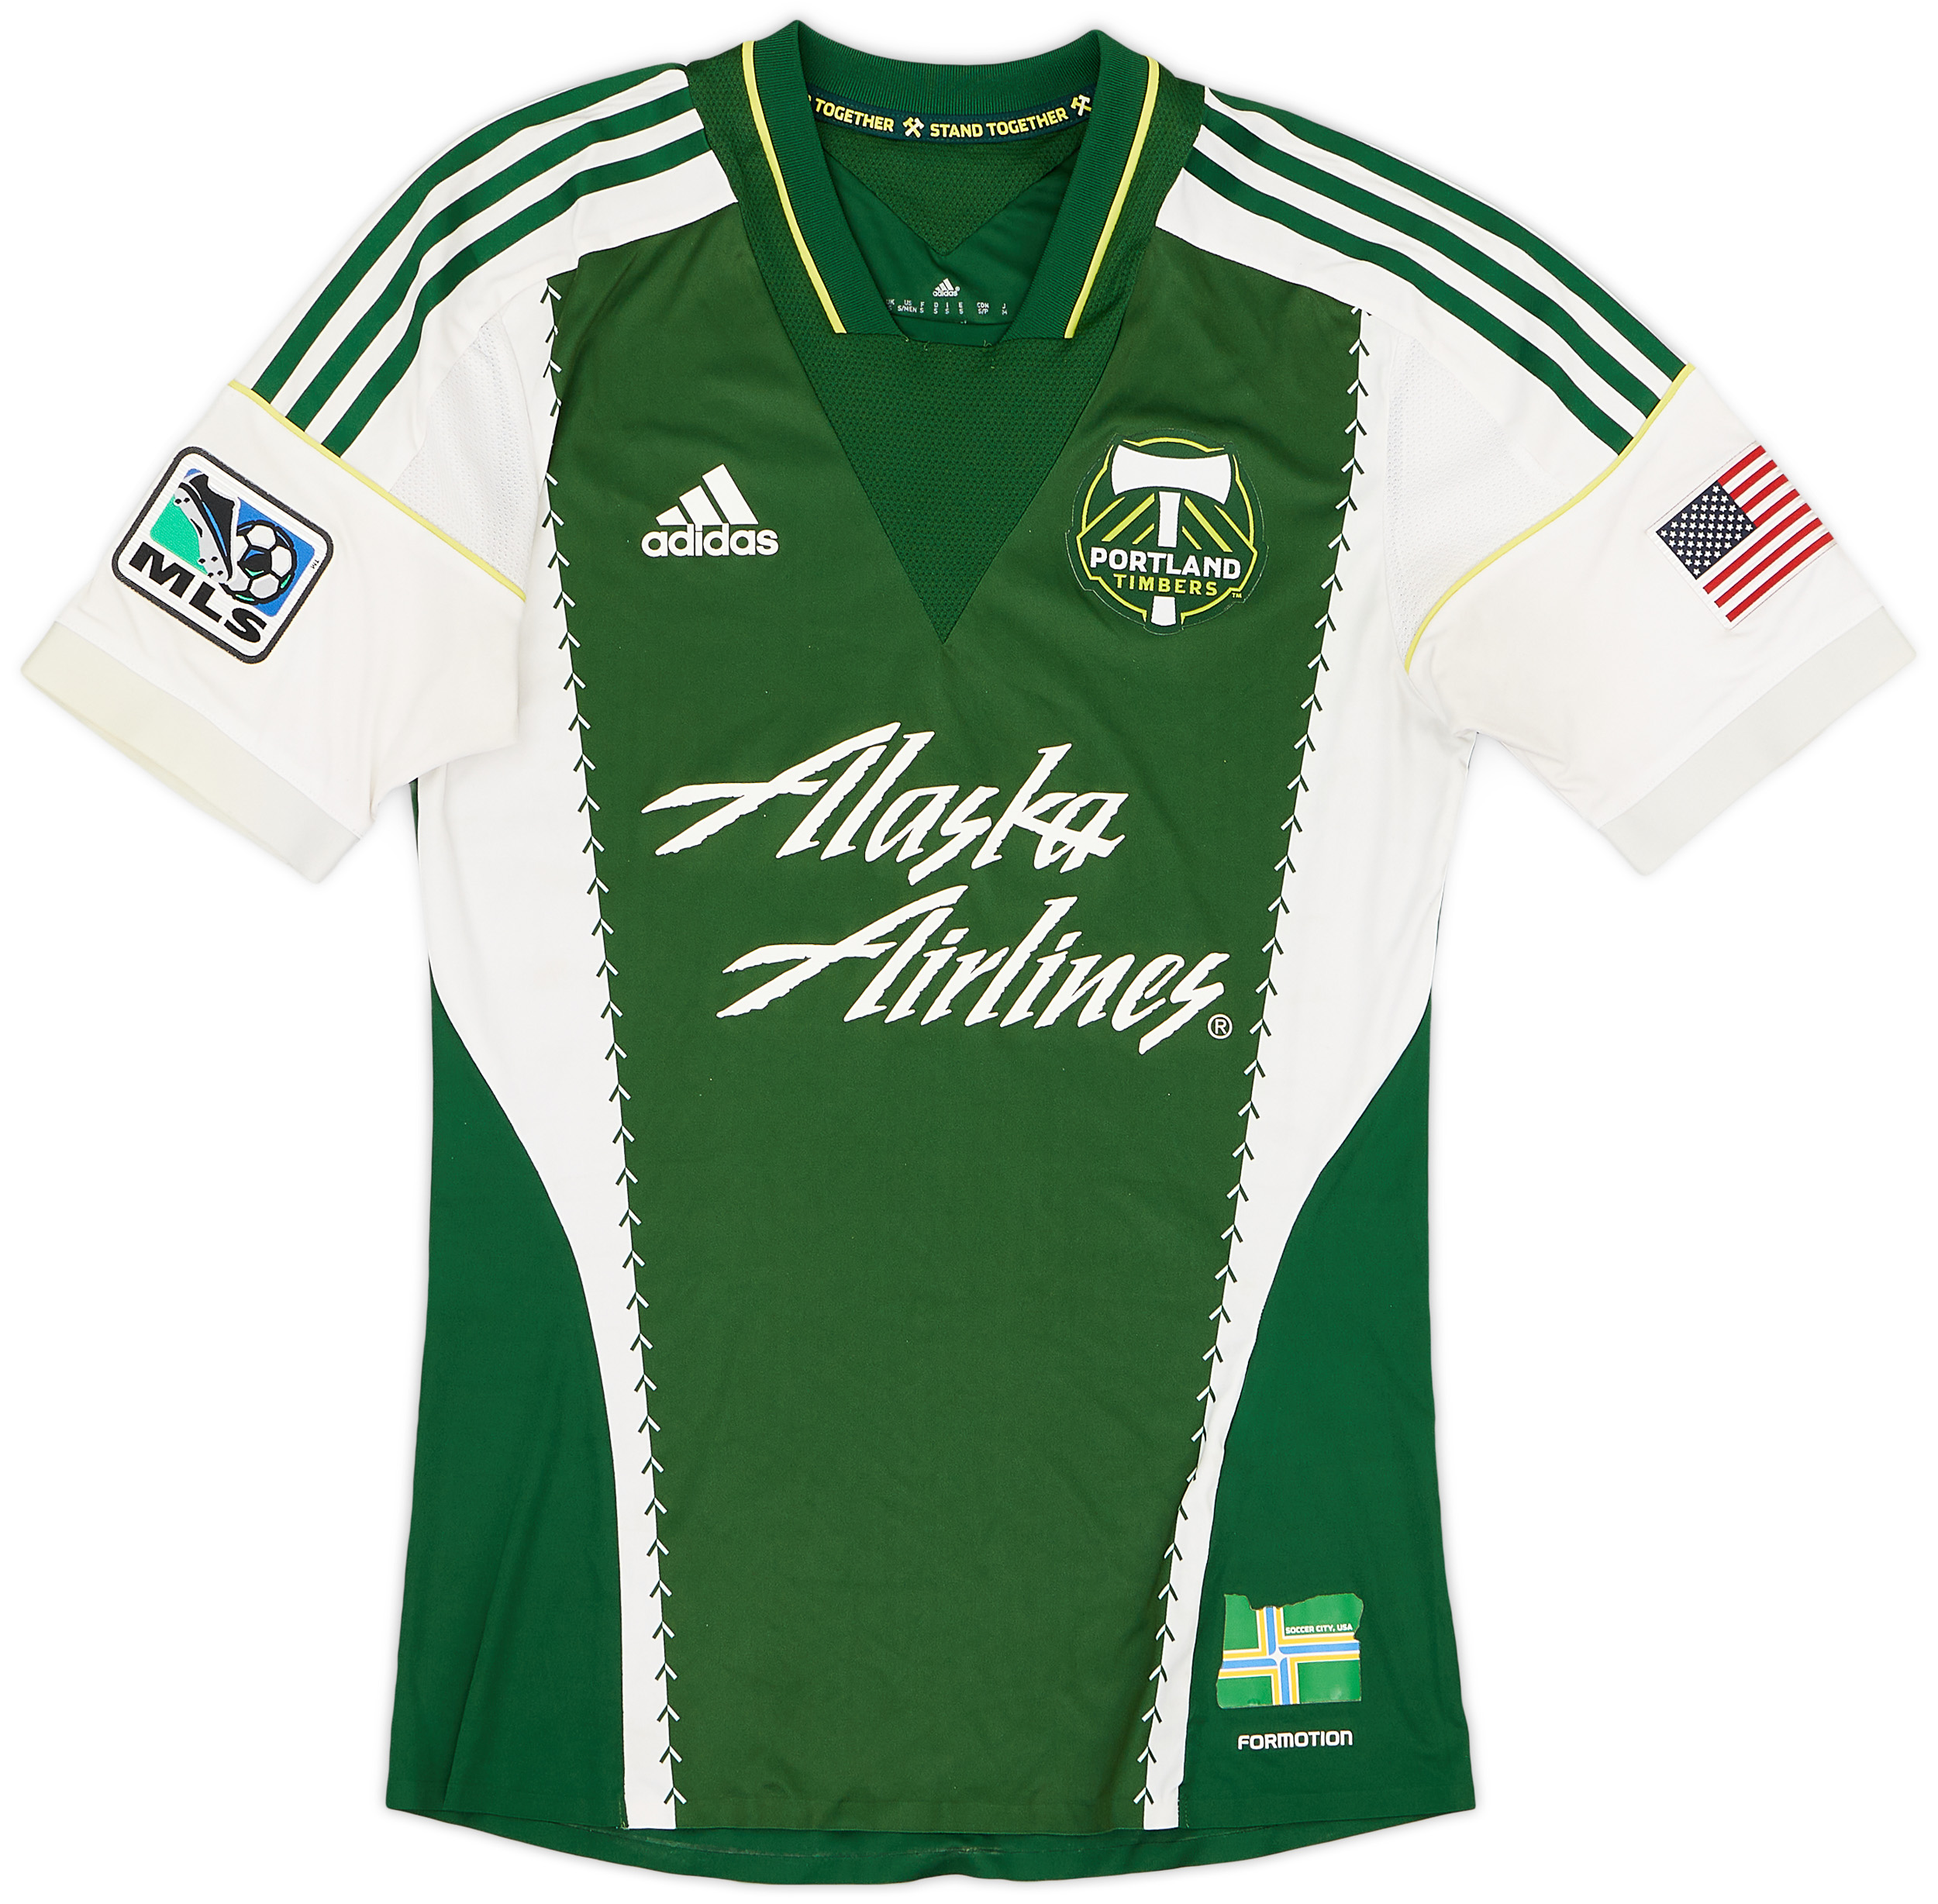 2013-14 Portland Timbers Authentic Home Shirt - 8/10 - ()